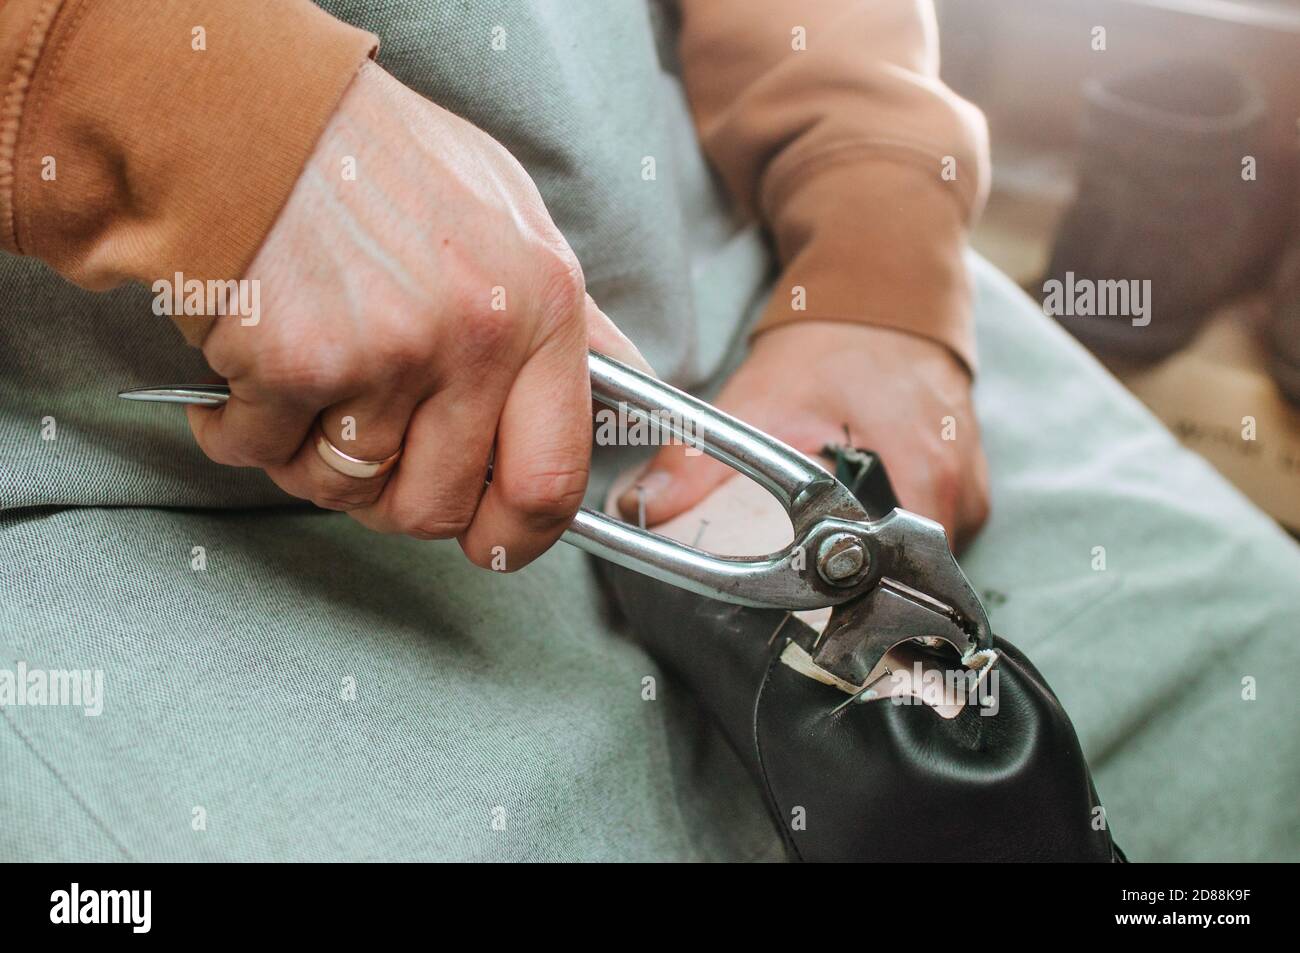 Shoemakers hands making shoe using special tools Stock Photo